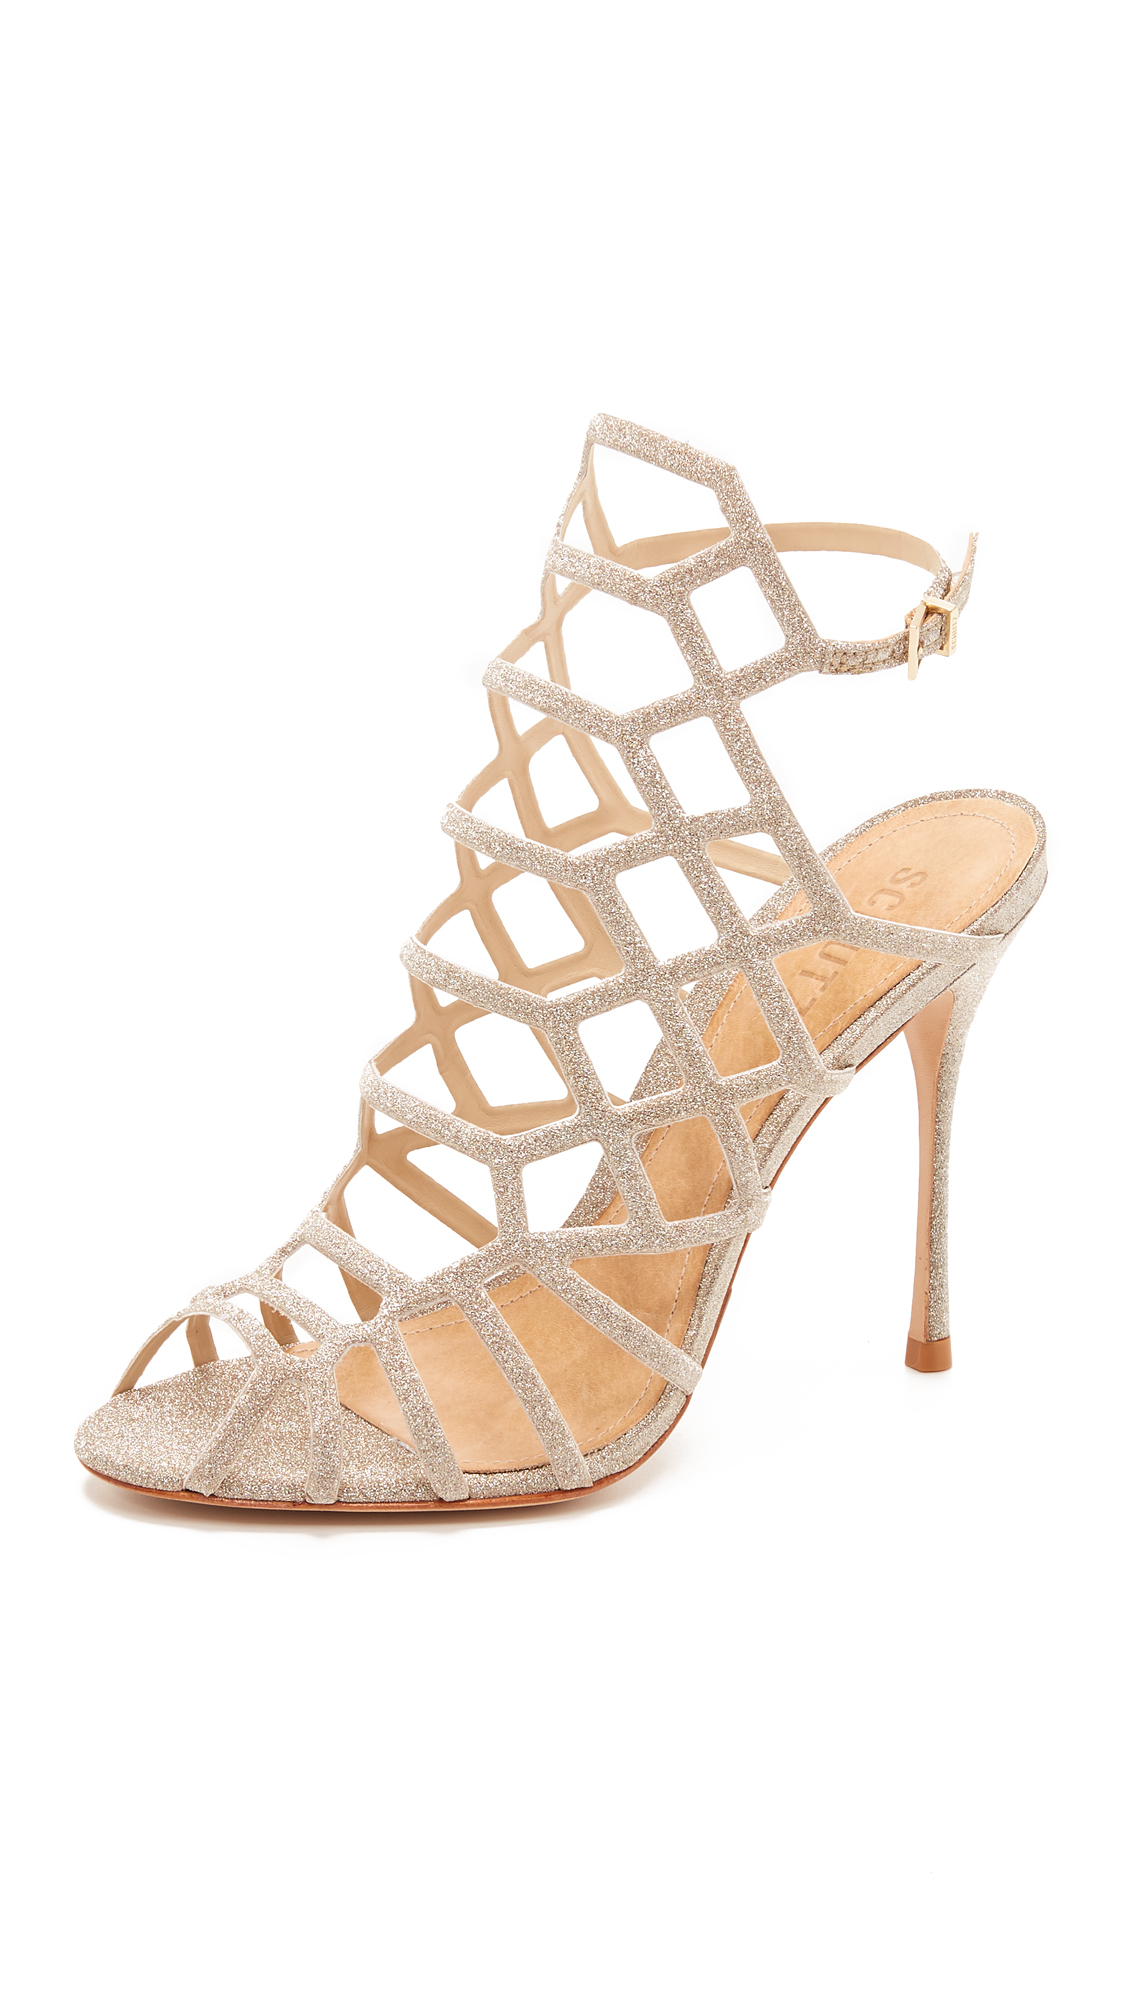 SCHUTZ SHOES Juliana Caged Sandals in Natural | Lyst